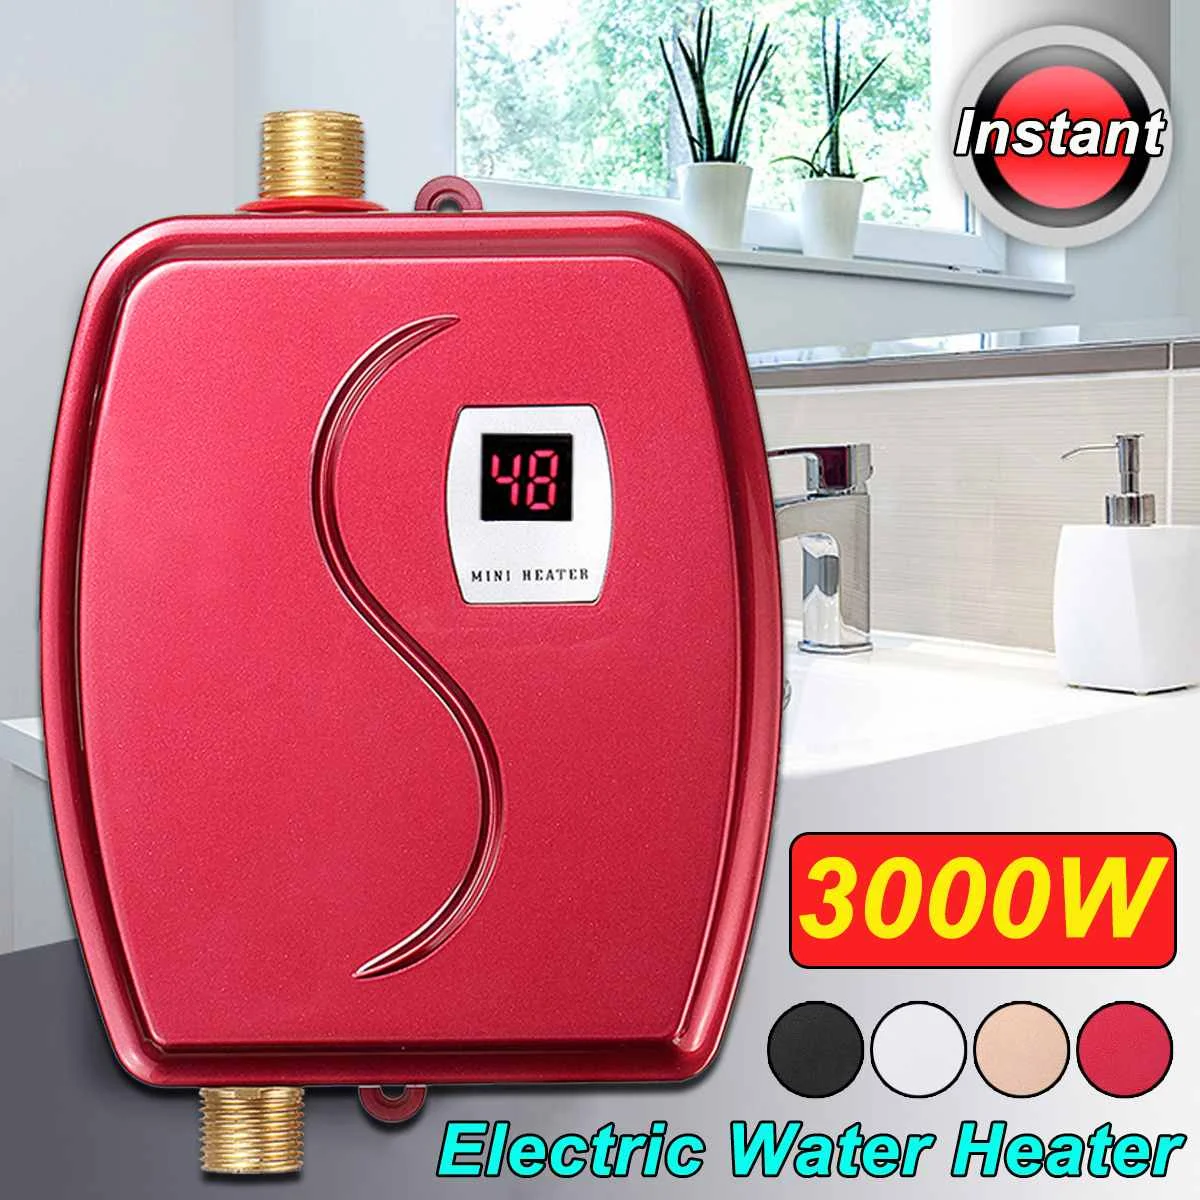 3000W High Quality Instant Tankless Water Heater 220V&110V Thermostat Induction Heater Electric Heaters Shower Fast Heating